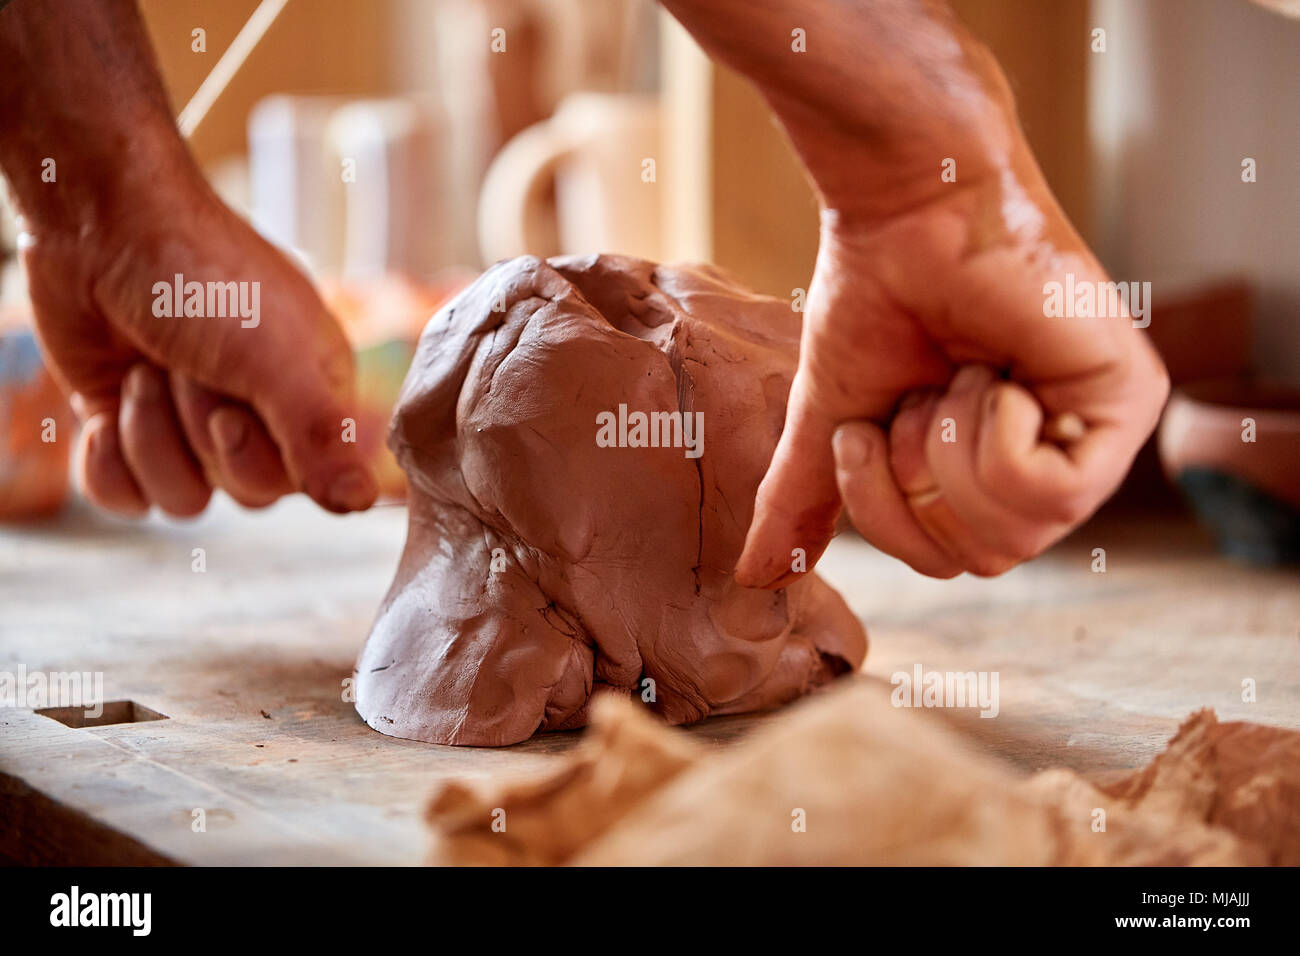 Preparation of Clay for Pottery by Hand Stock Image - Image of